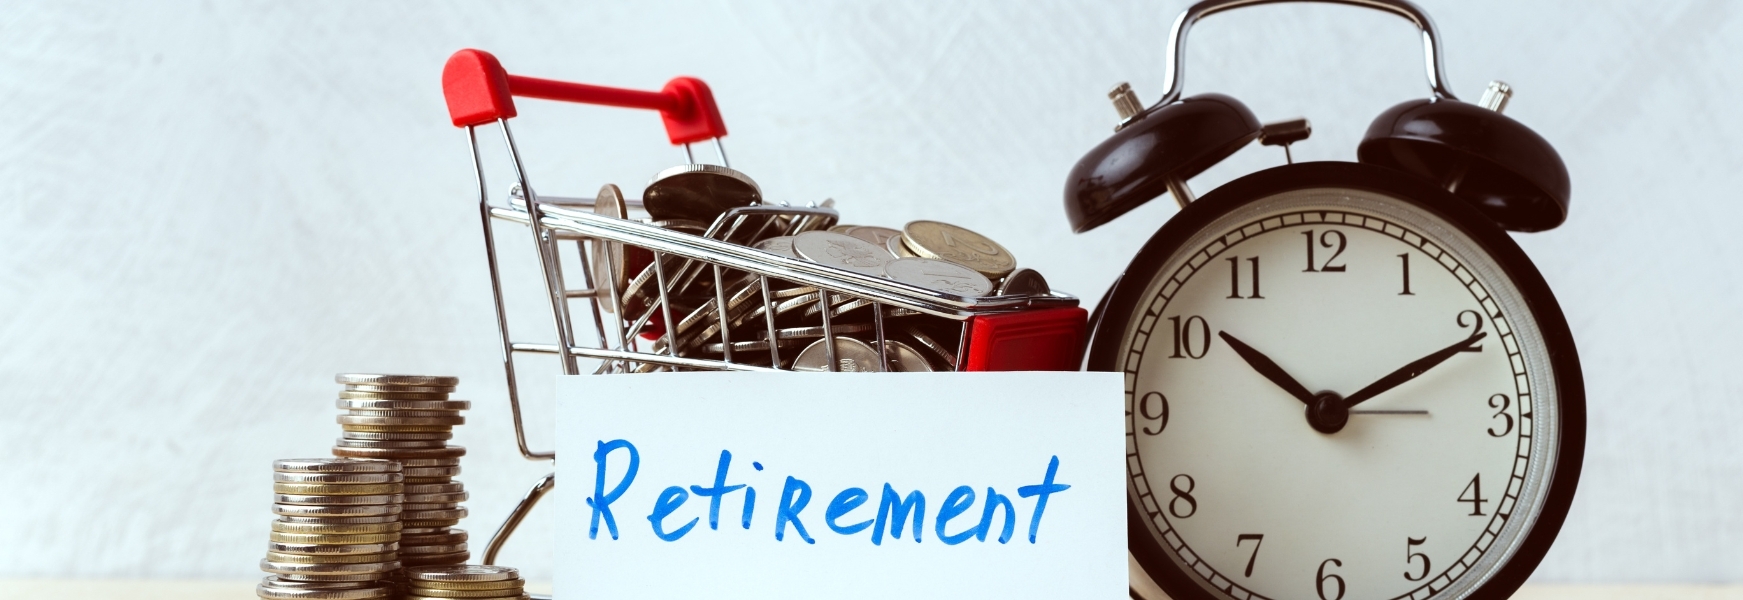 Retirement Account Early Withdrawal Penalties: Avoid Them Do you want to spend the retirement money in your account? Here are some cautions you need to take to avoid early withdrawal…